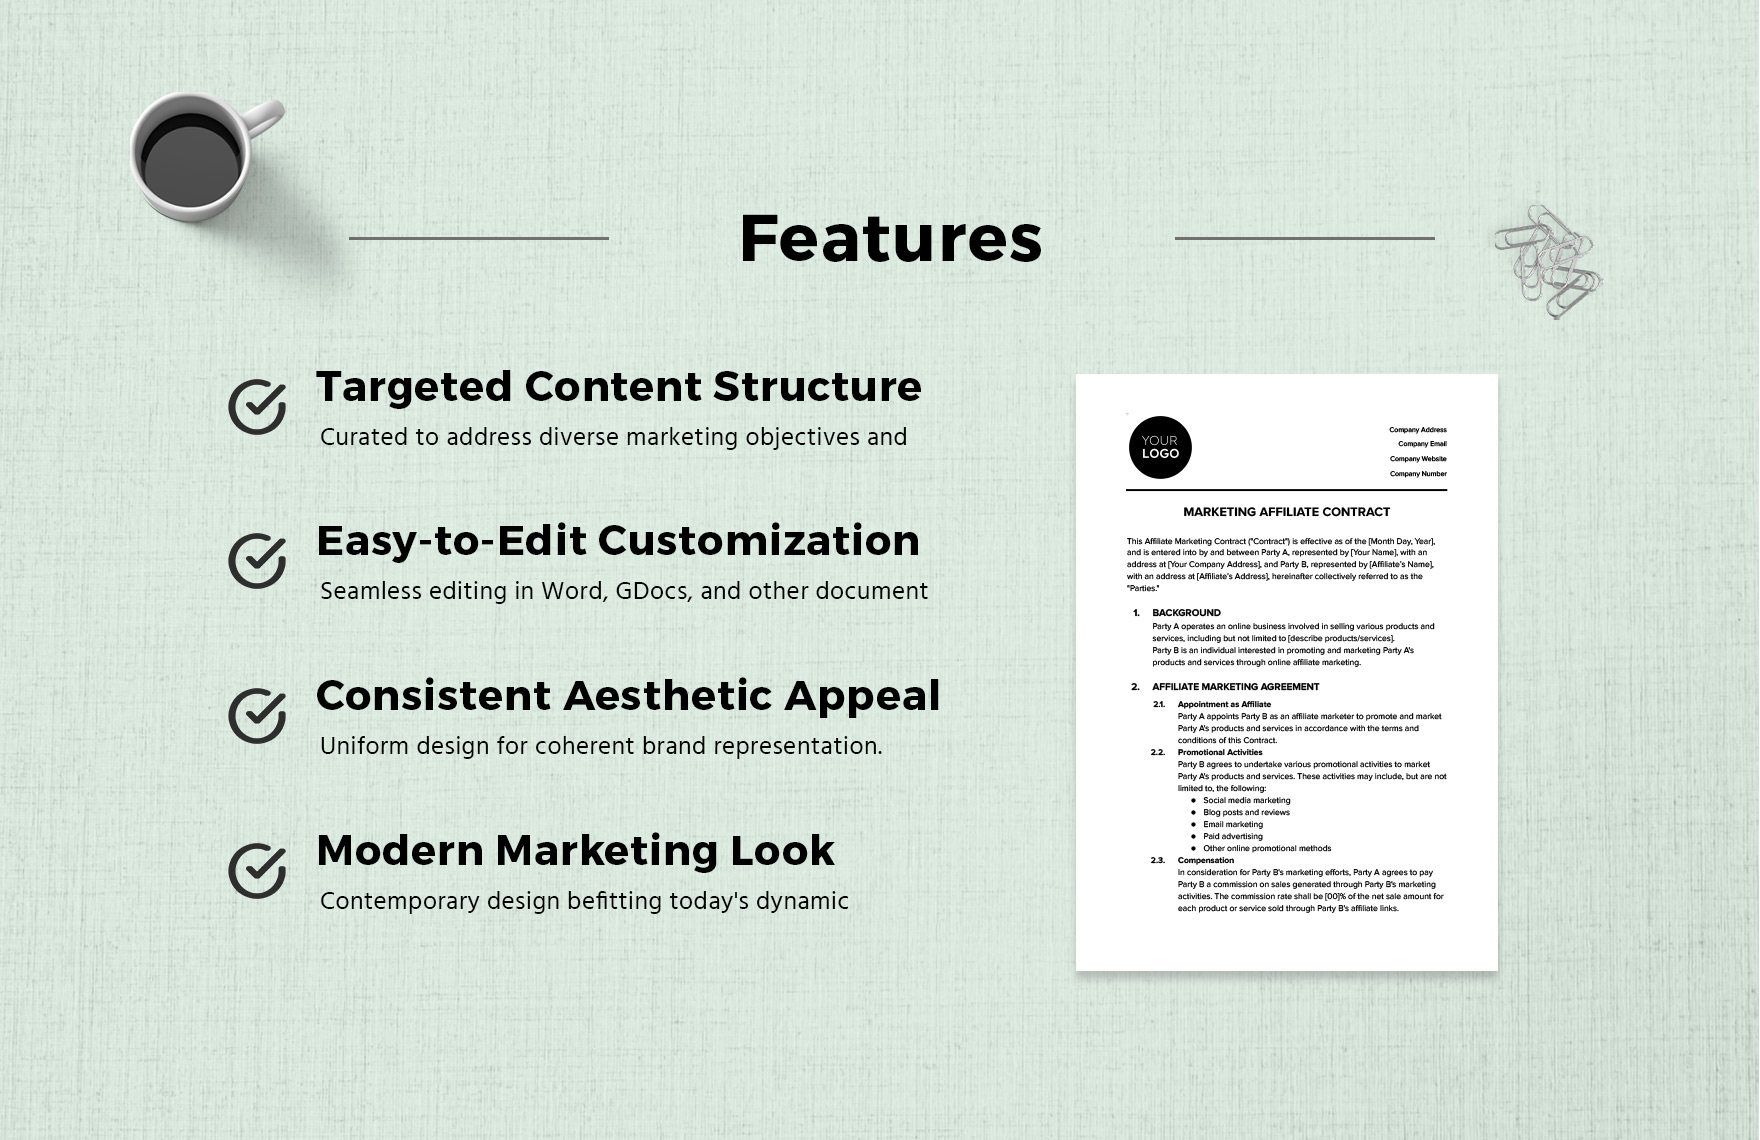 Marketing Affiliate Contract Template